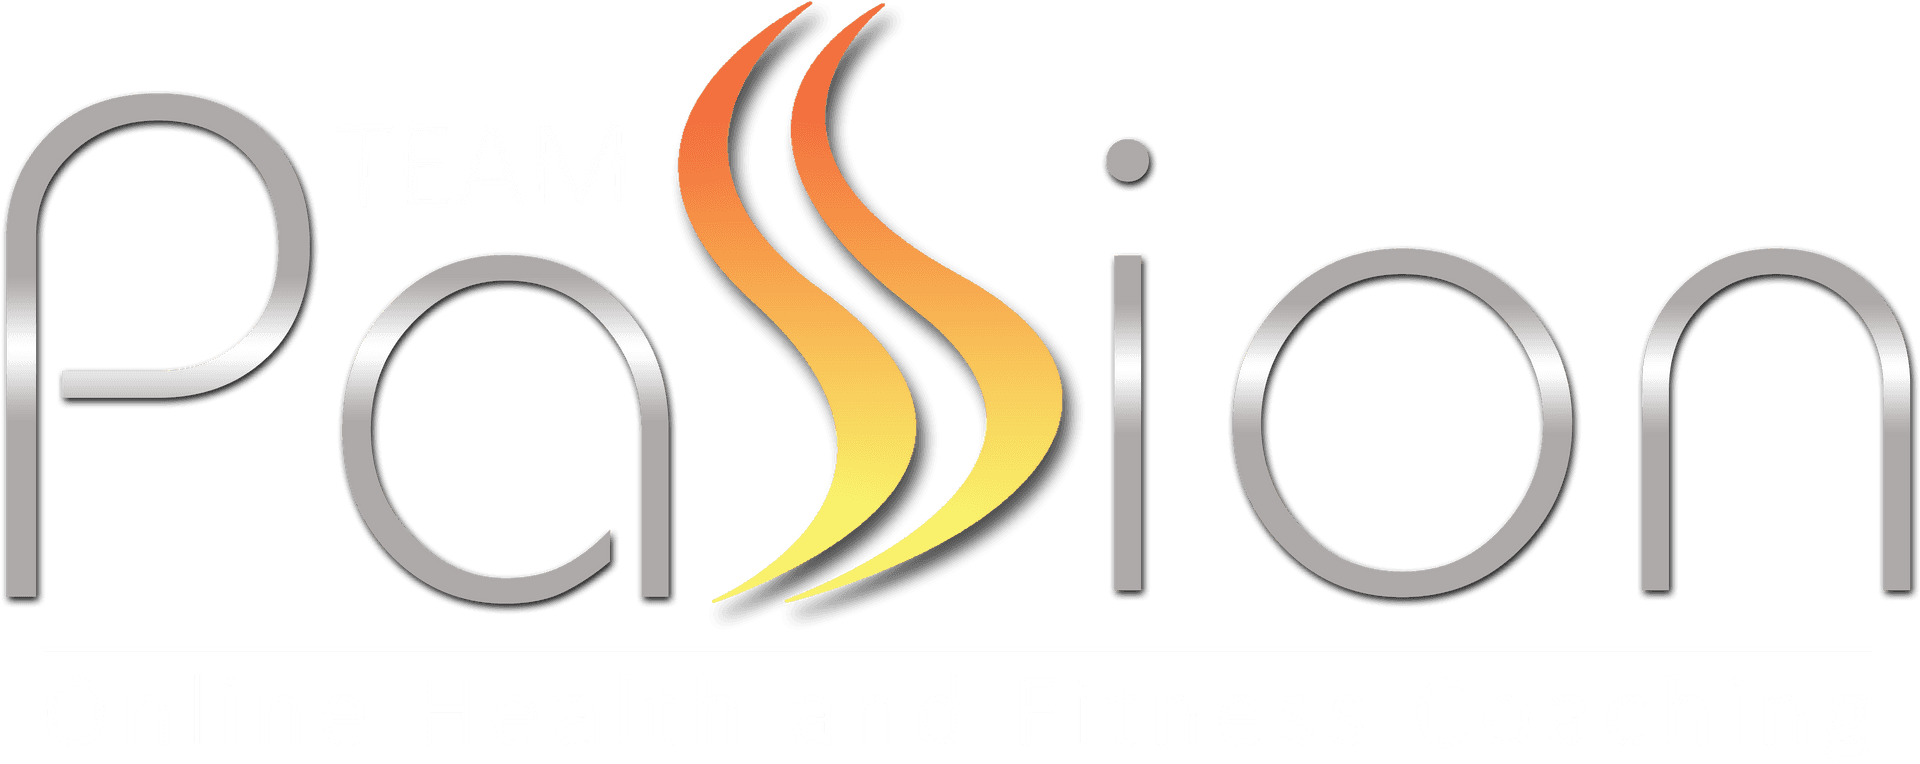 Team Passion Online Health Fitness Coaching Logo PNG image